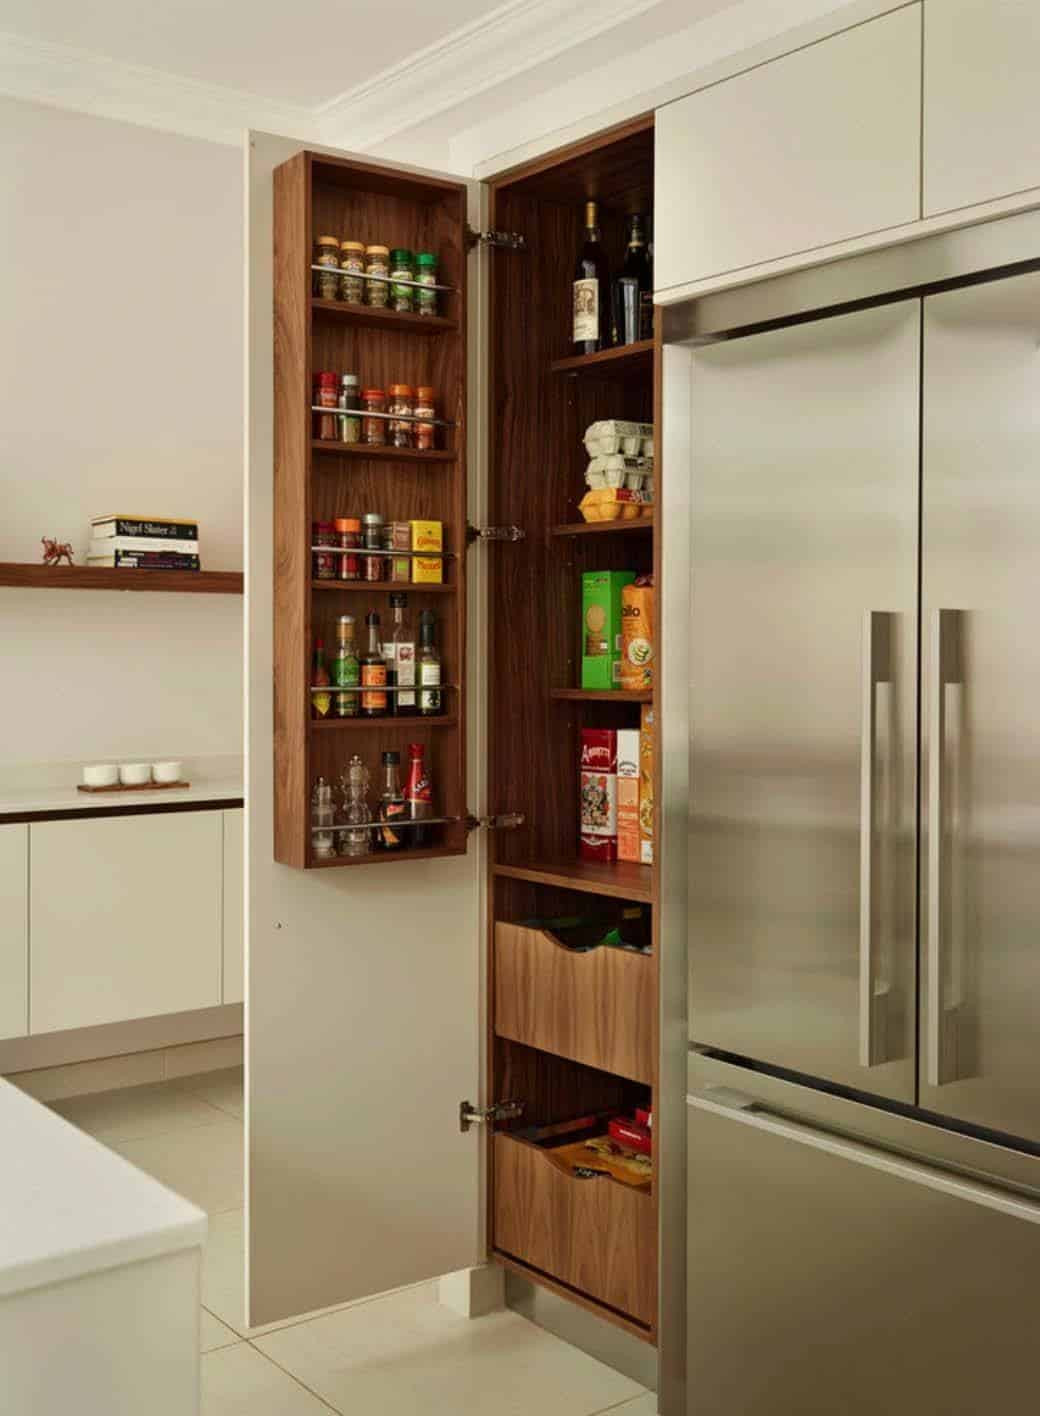 Pantry Ideas For Small Kitchens
 35 Clever ideas to help organize your kitchen pantry